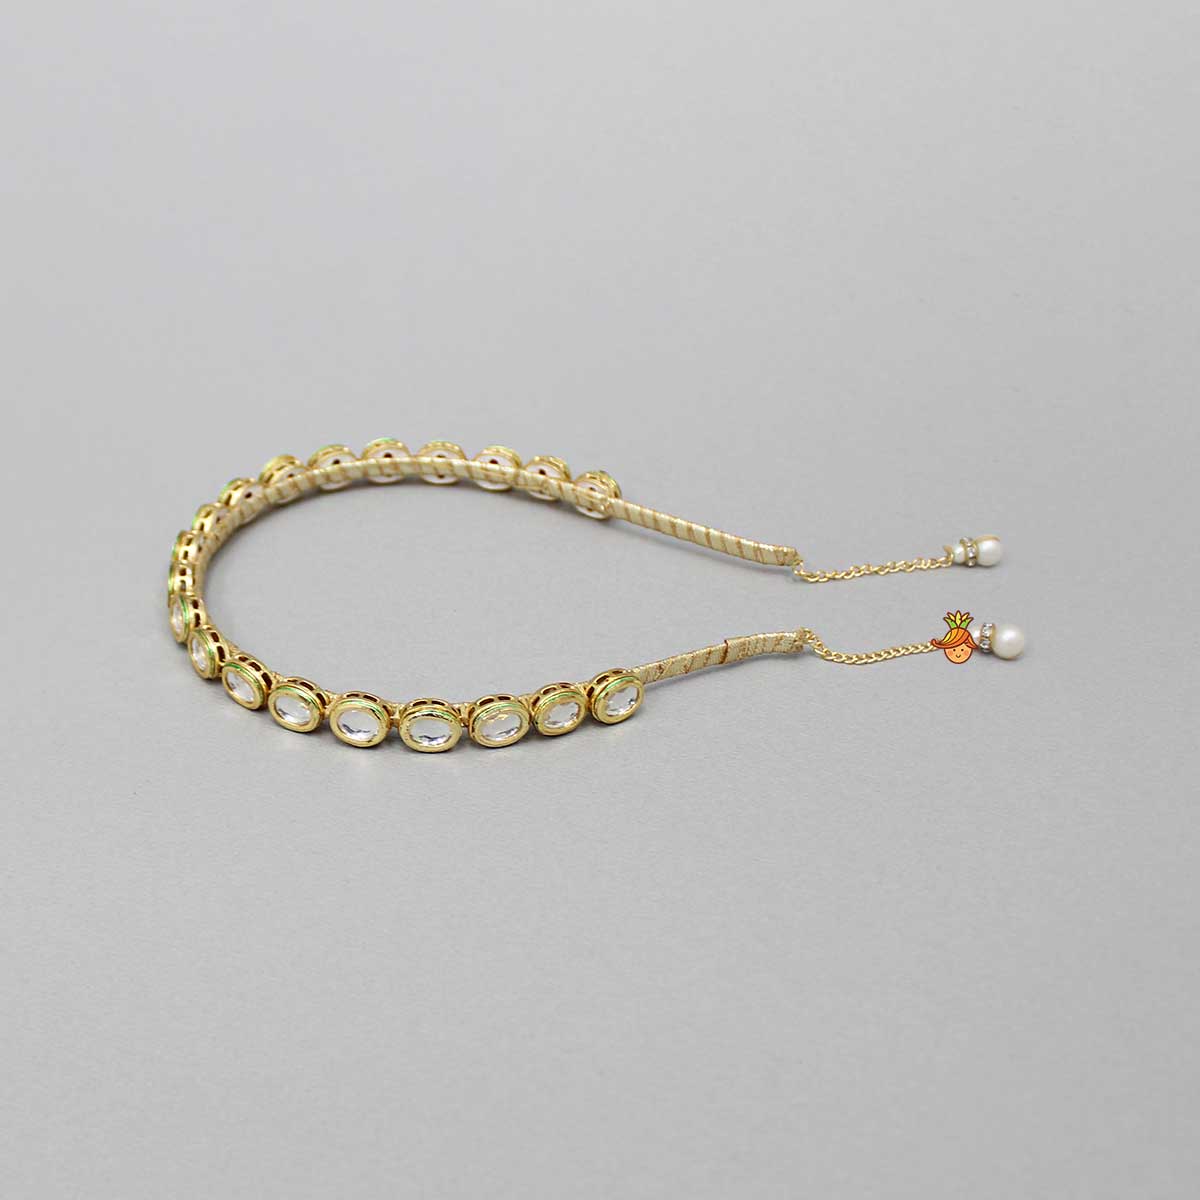 Embroidered Golden Chain Hair Band